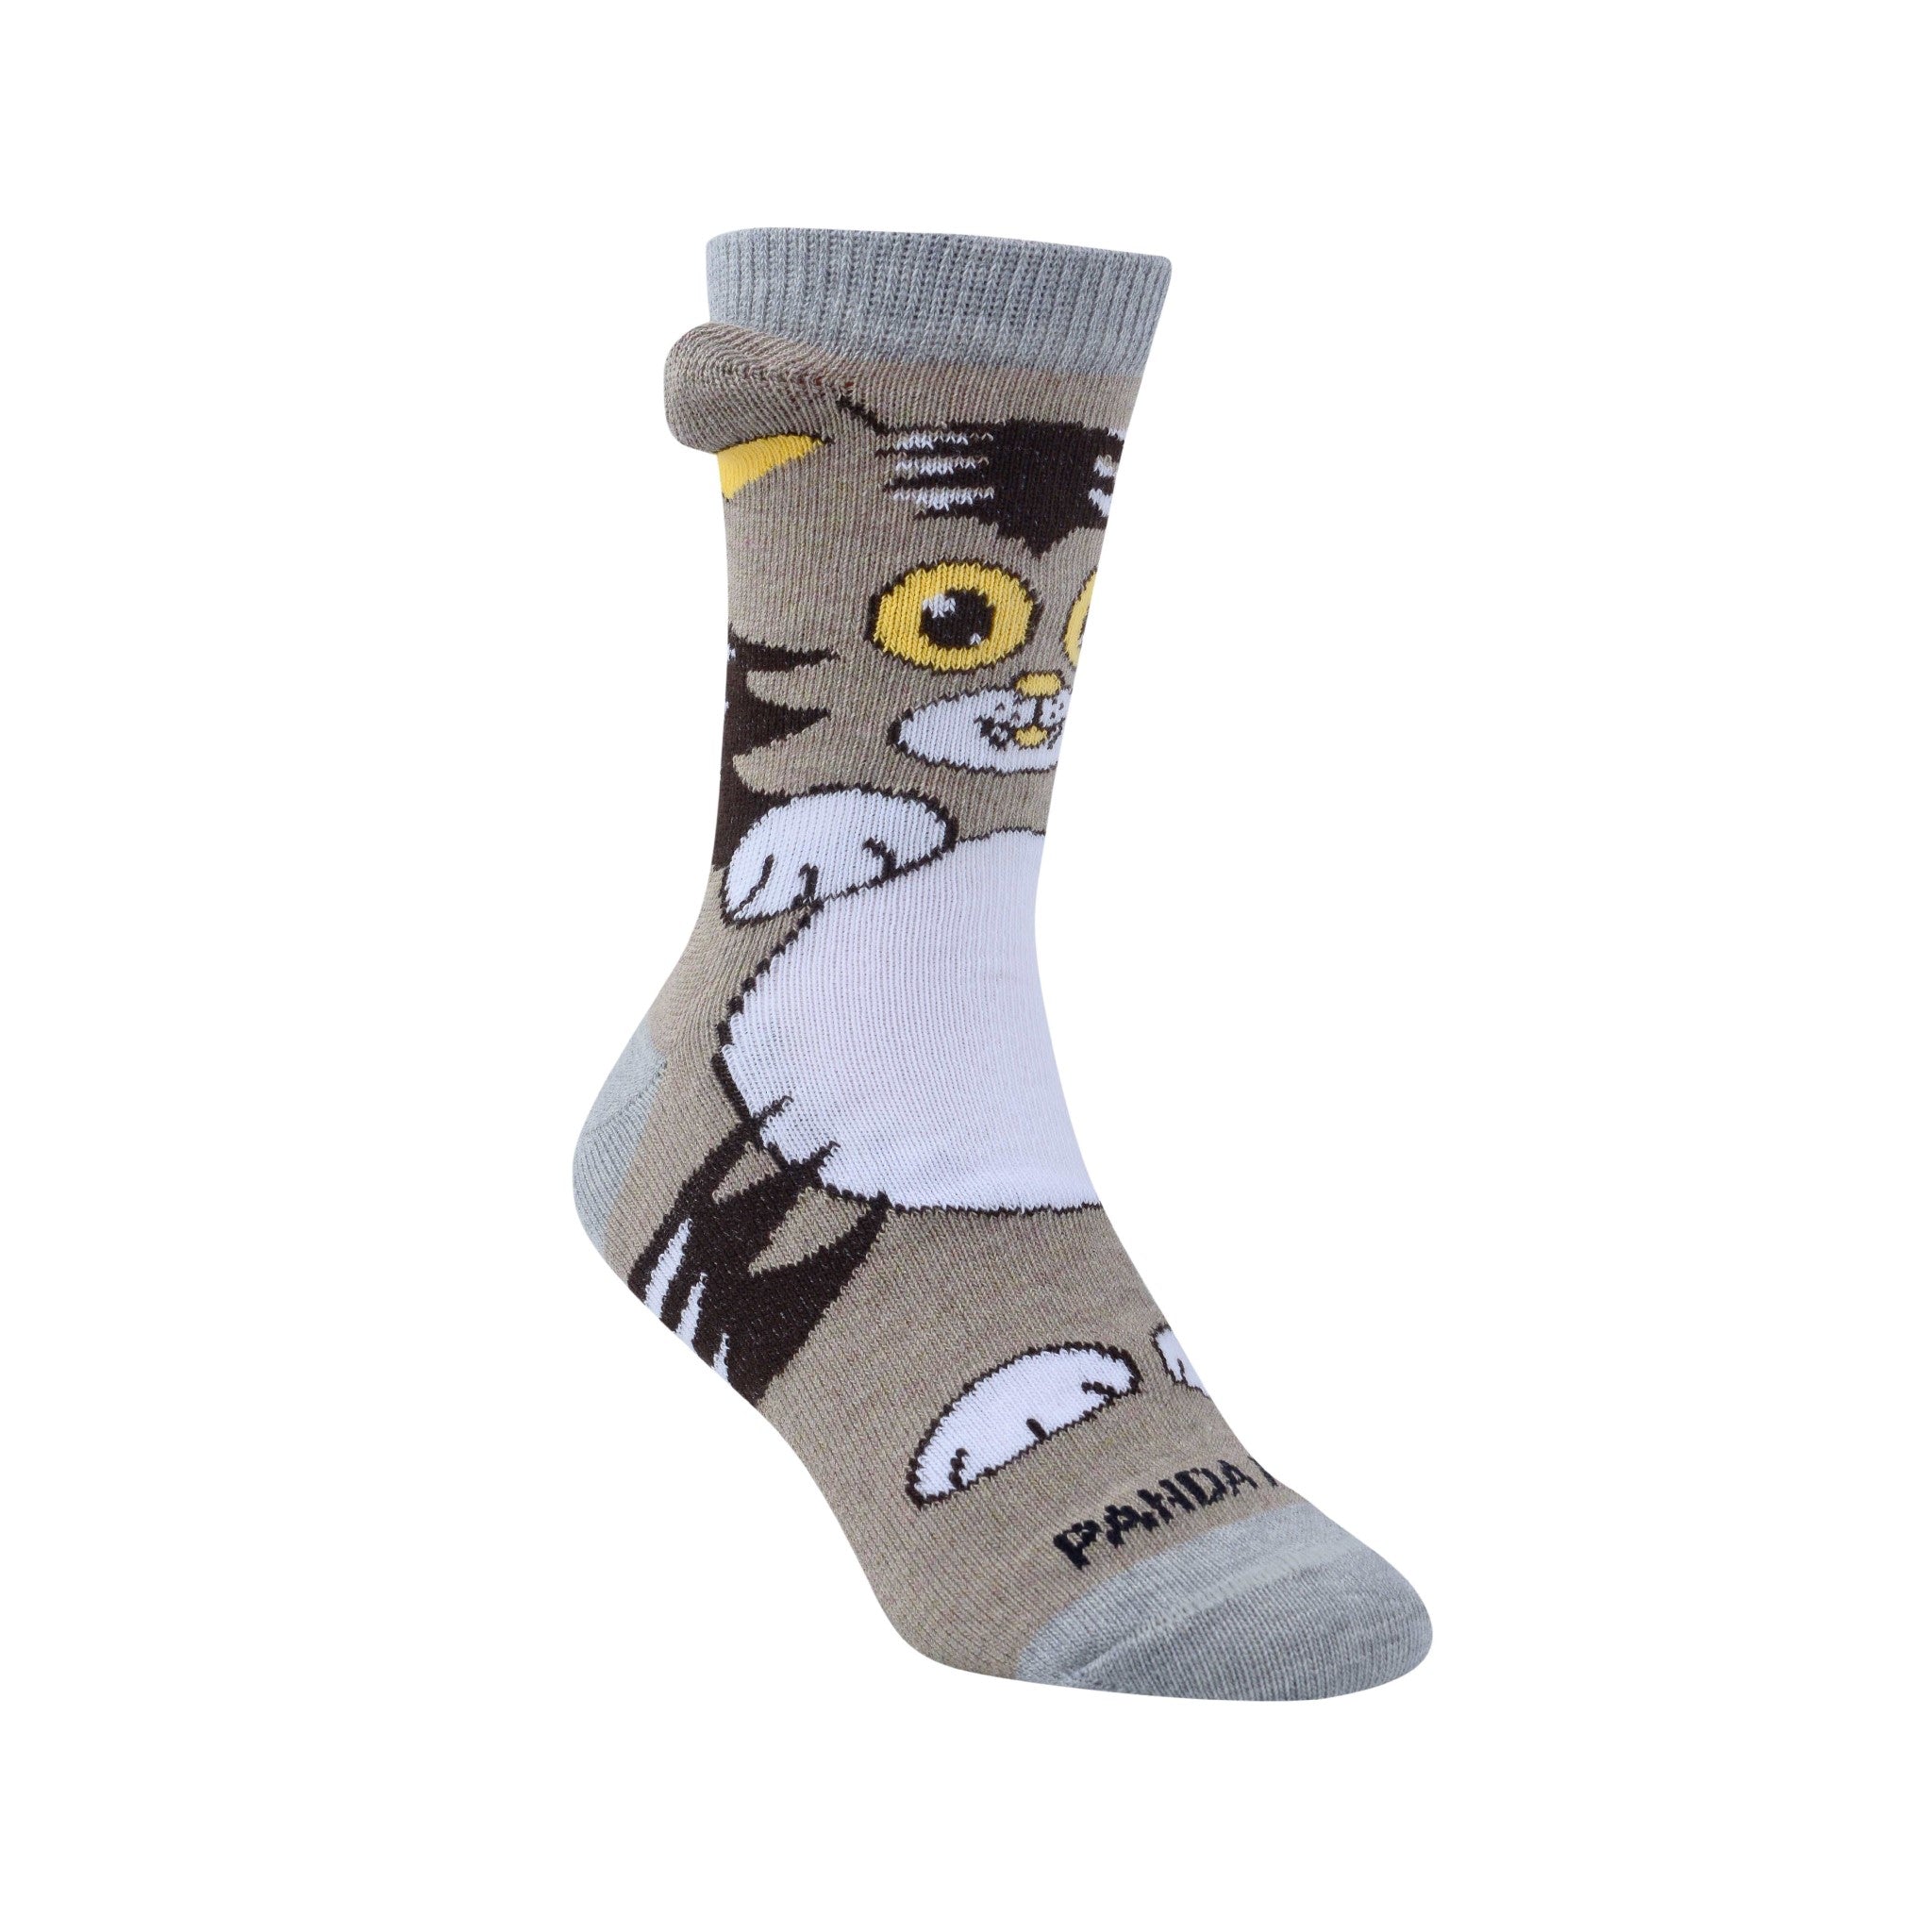 Curious Cat Socks (Ages 3-7) from the Sock Panda